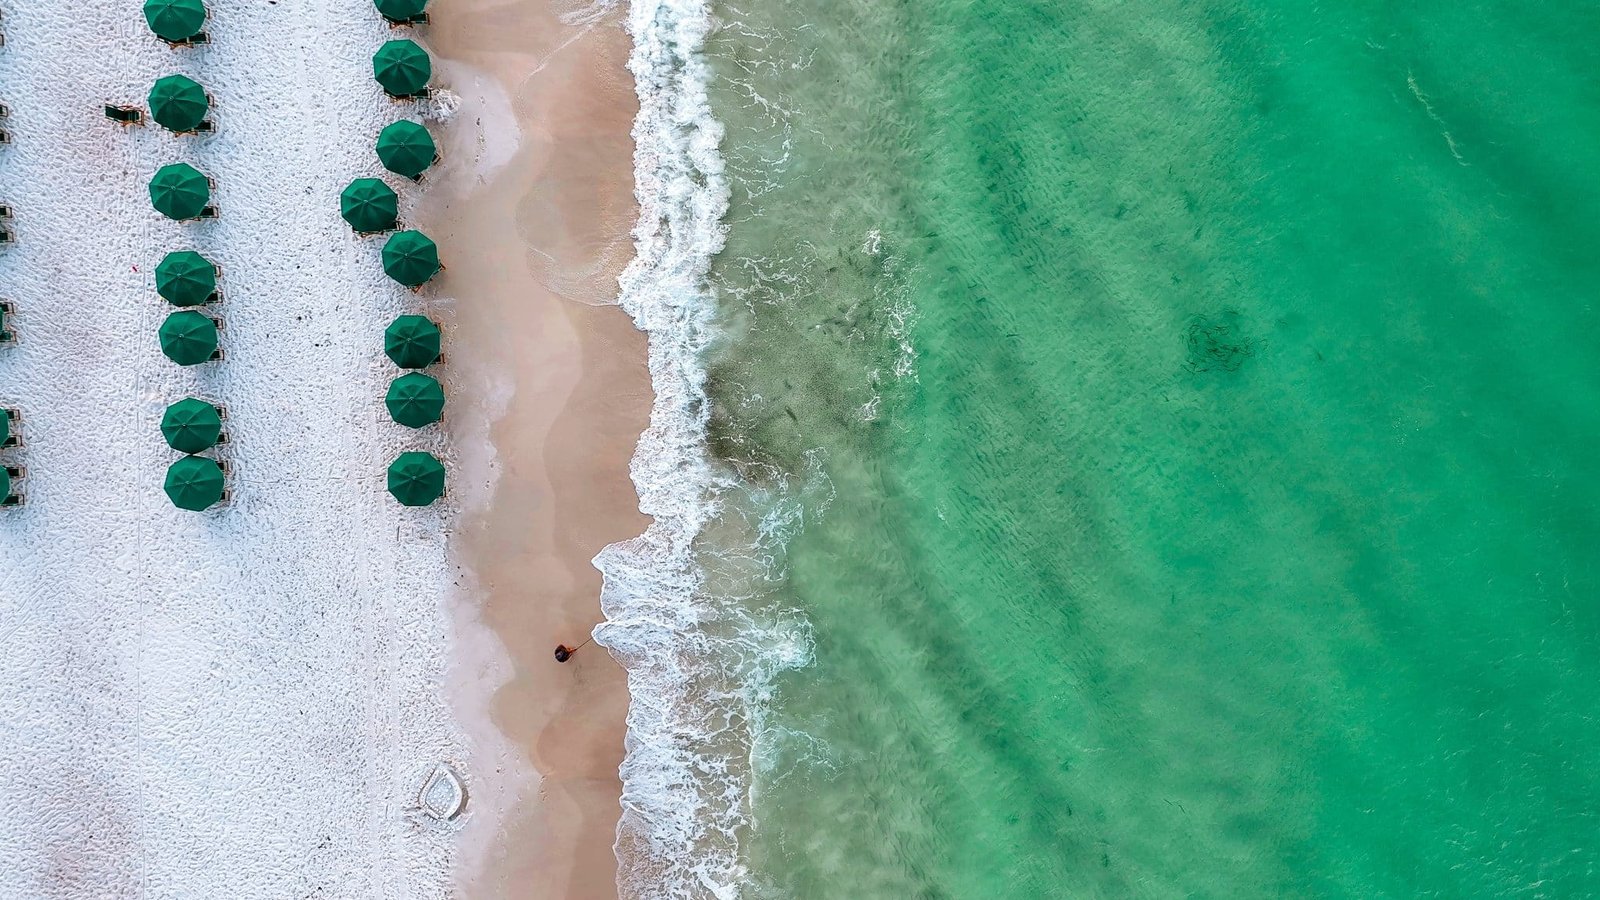 Tide breaking on Destin Beach. Emerald green waters in the morning as waves crash on Destin Beach. Fish swimming in low tide. Beach chairs and umbrellas set up in the morning for tourists and vacationers to relax on a Florida day.